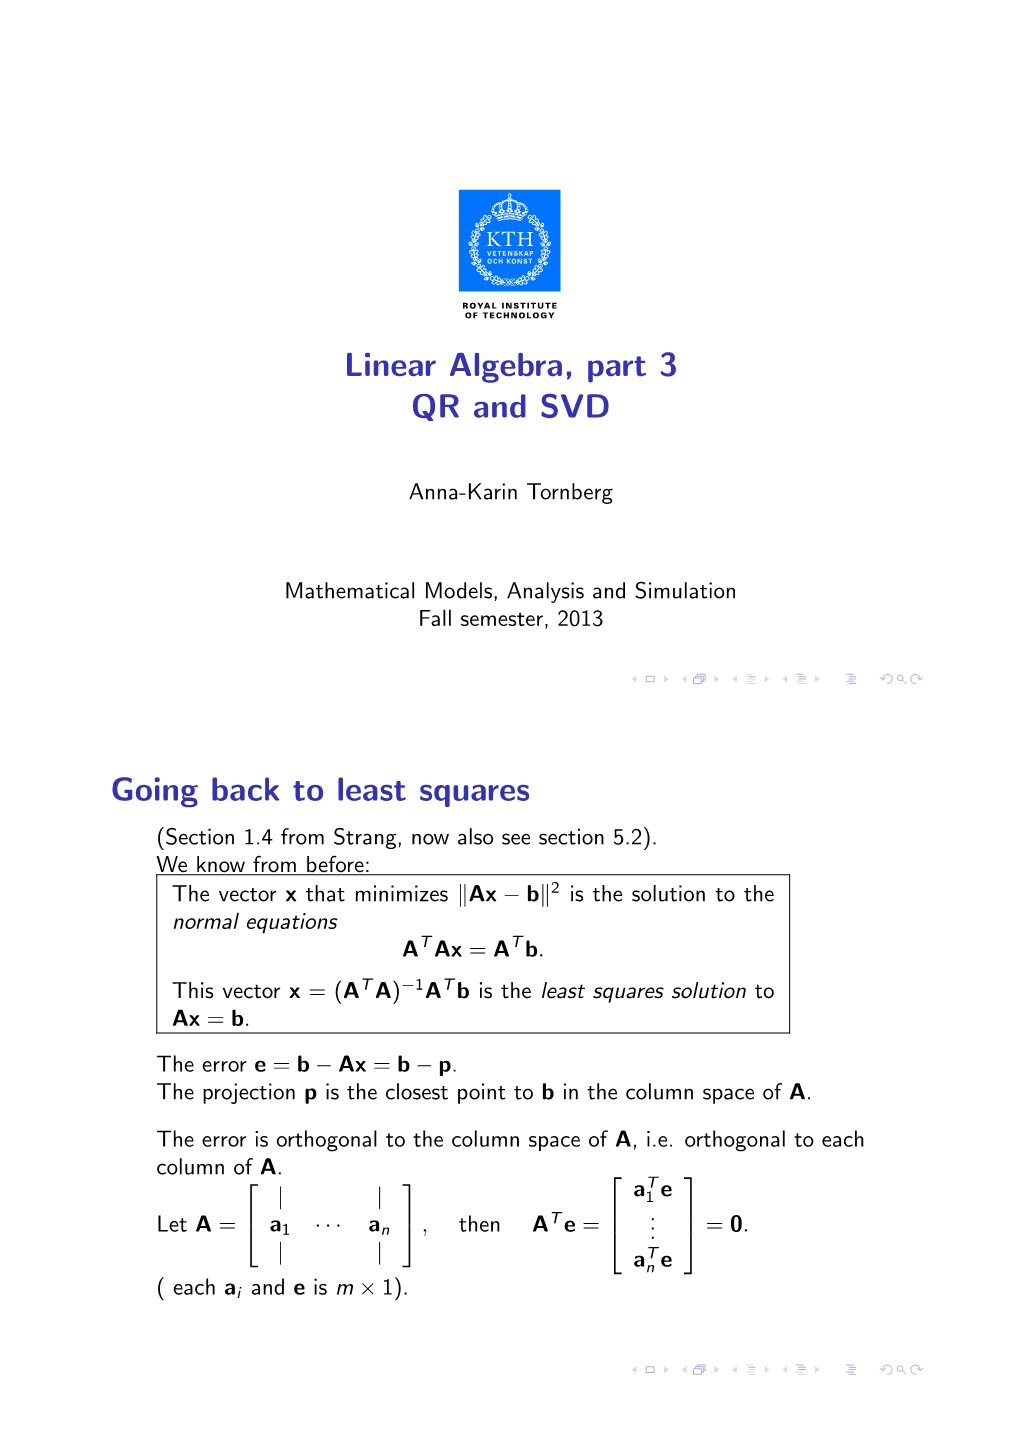 Linear Algebra, Part 3 QR and SVD Going Back to Least Squares